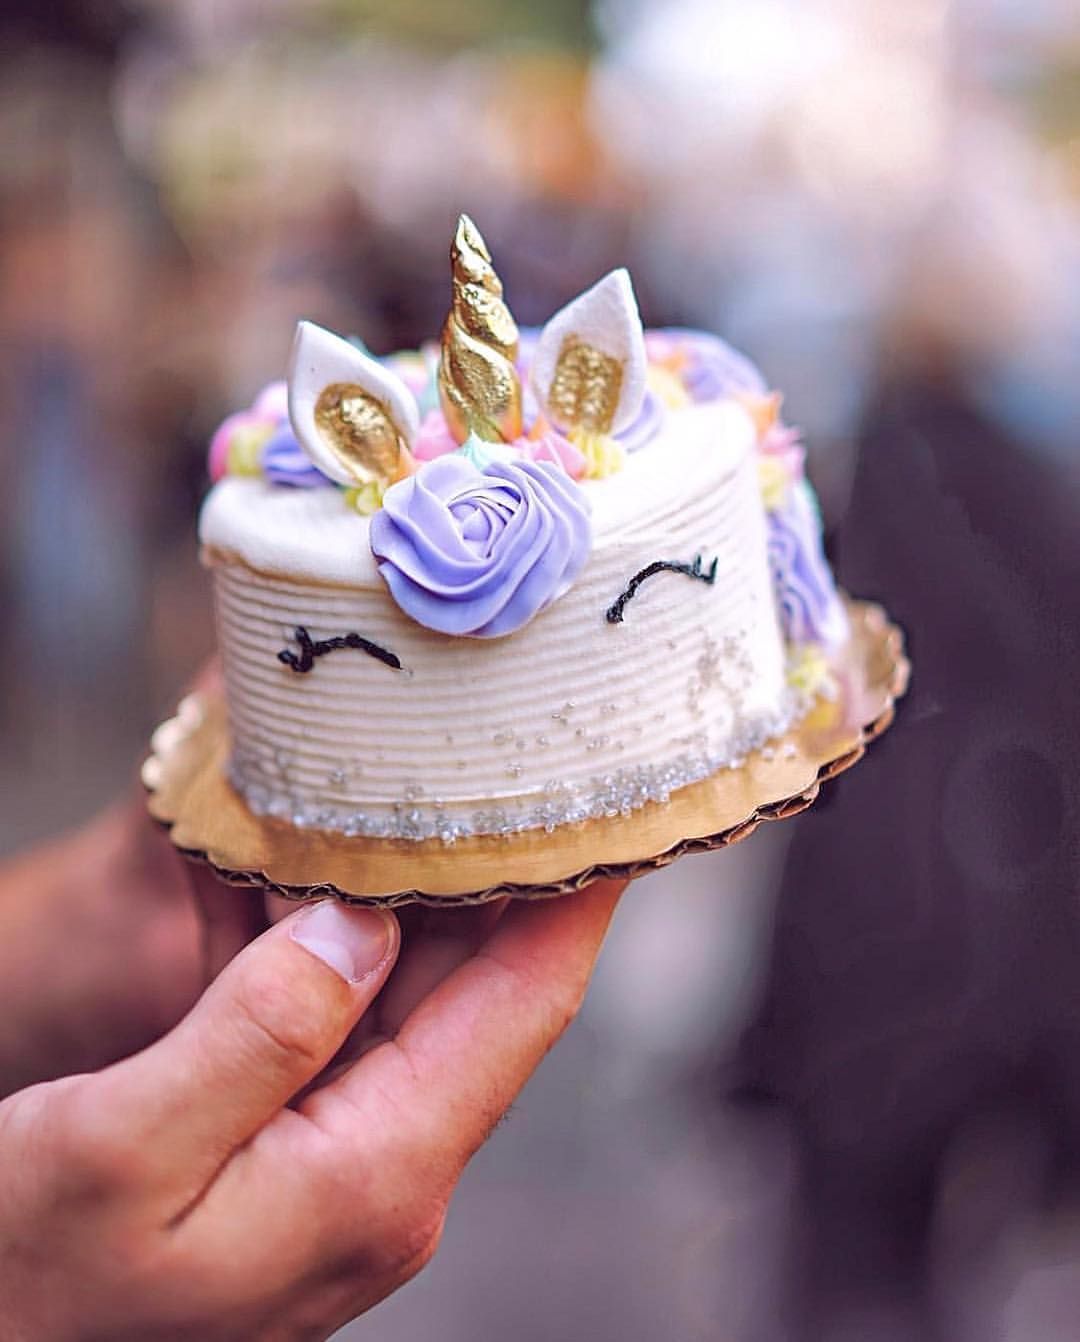 STAX ICE CREAM on Instagram: “They say good things come in small packages рџ¦„ Our mini unicorn cakes are made entirely of ice cream!! — Walk in and grab one from our cake…” -   11 mini cake Unicorn ideas